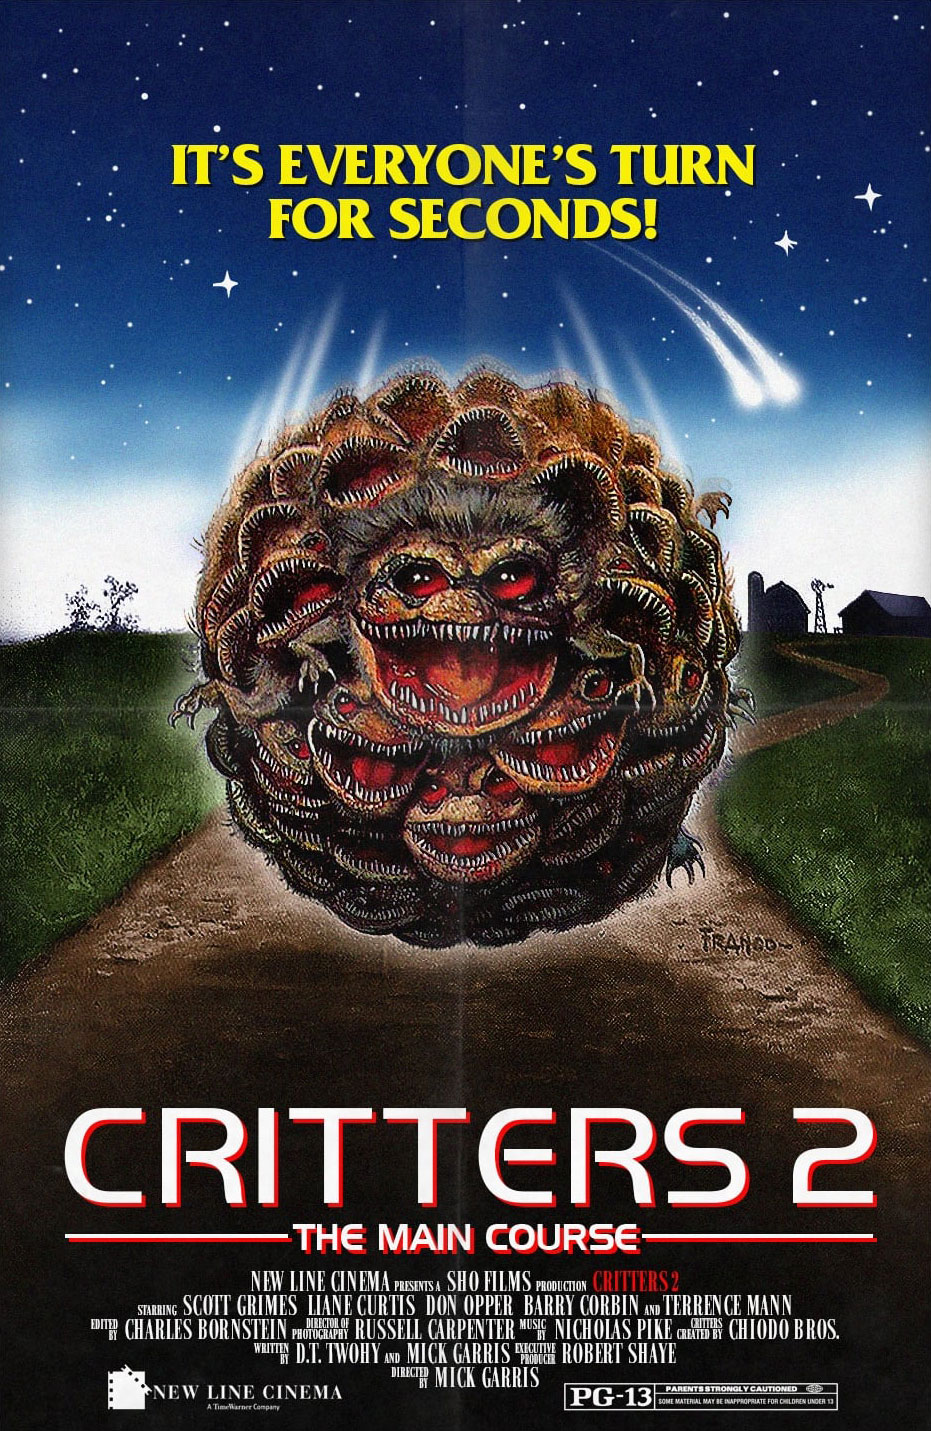 Critters 2 movie poster